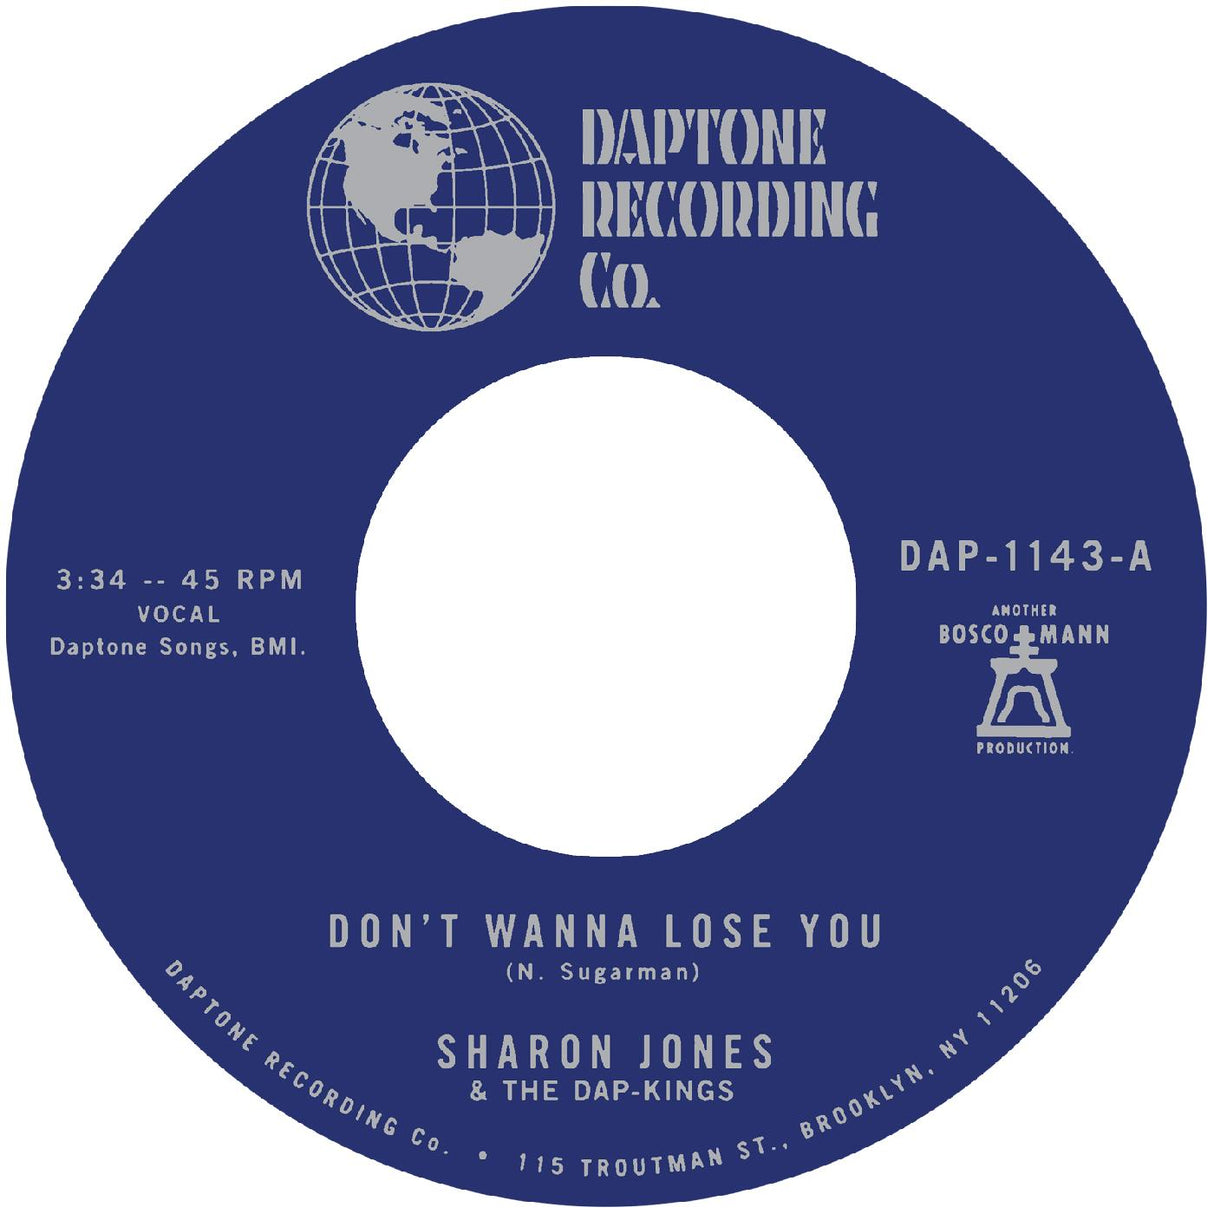 Sharon Jones & The Dap-Kings - Don't Want To Lose You b/w Don't Give a Friend a Number [Vinyl]